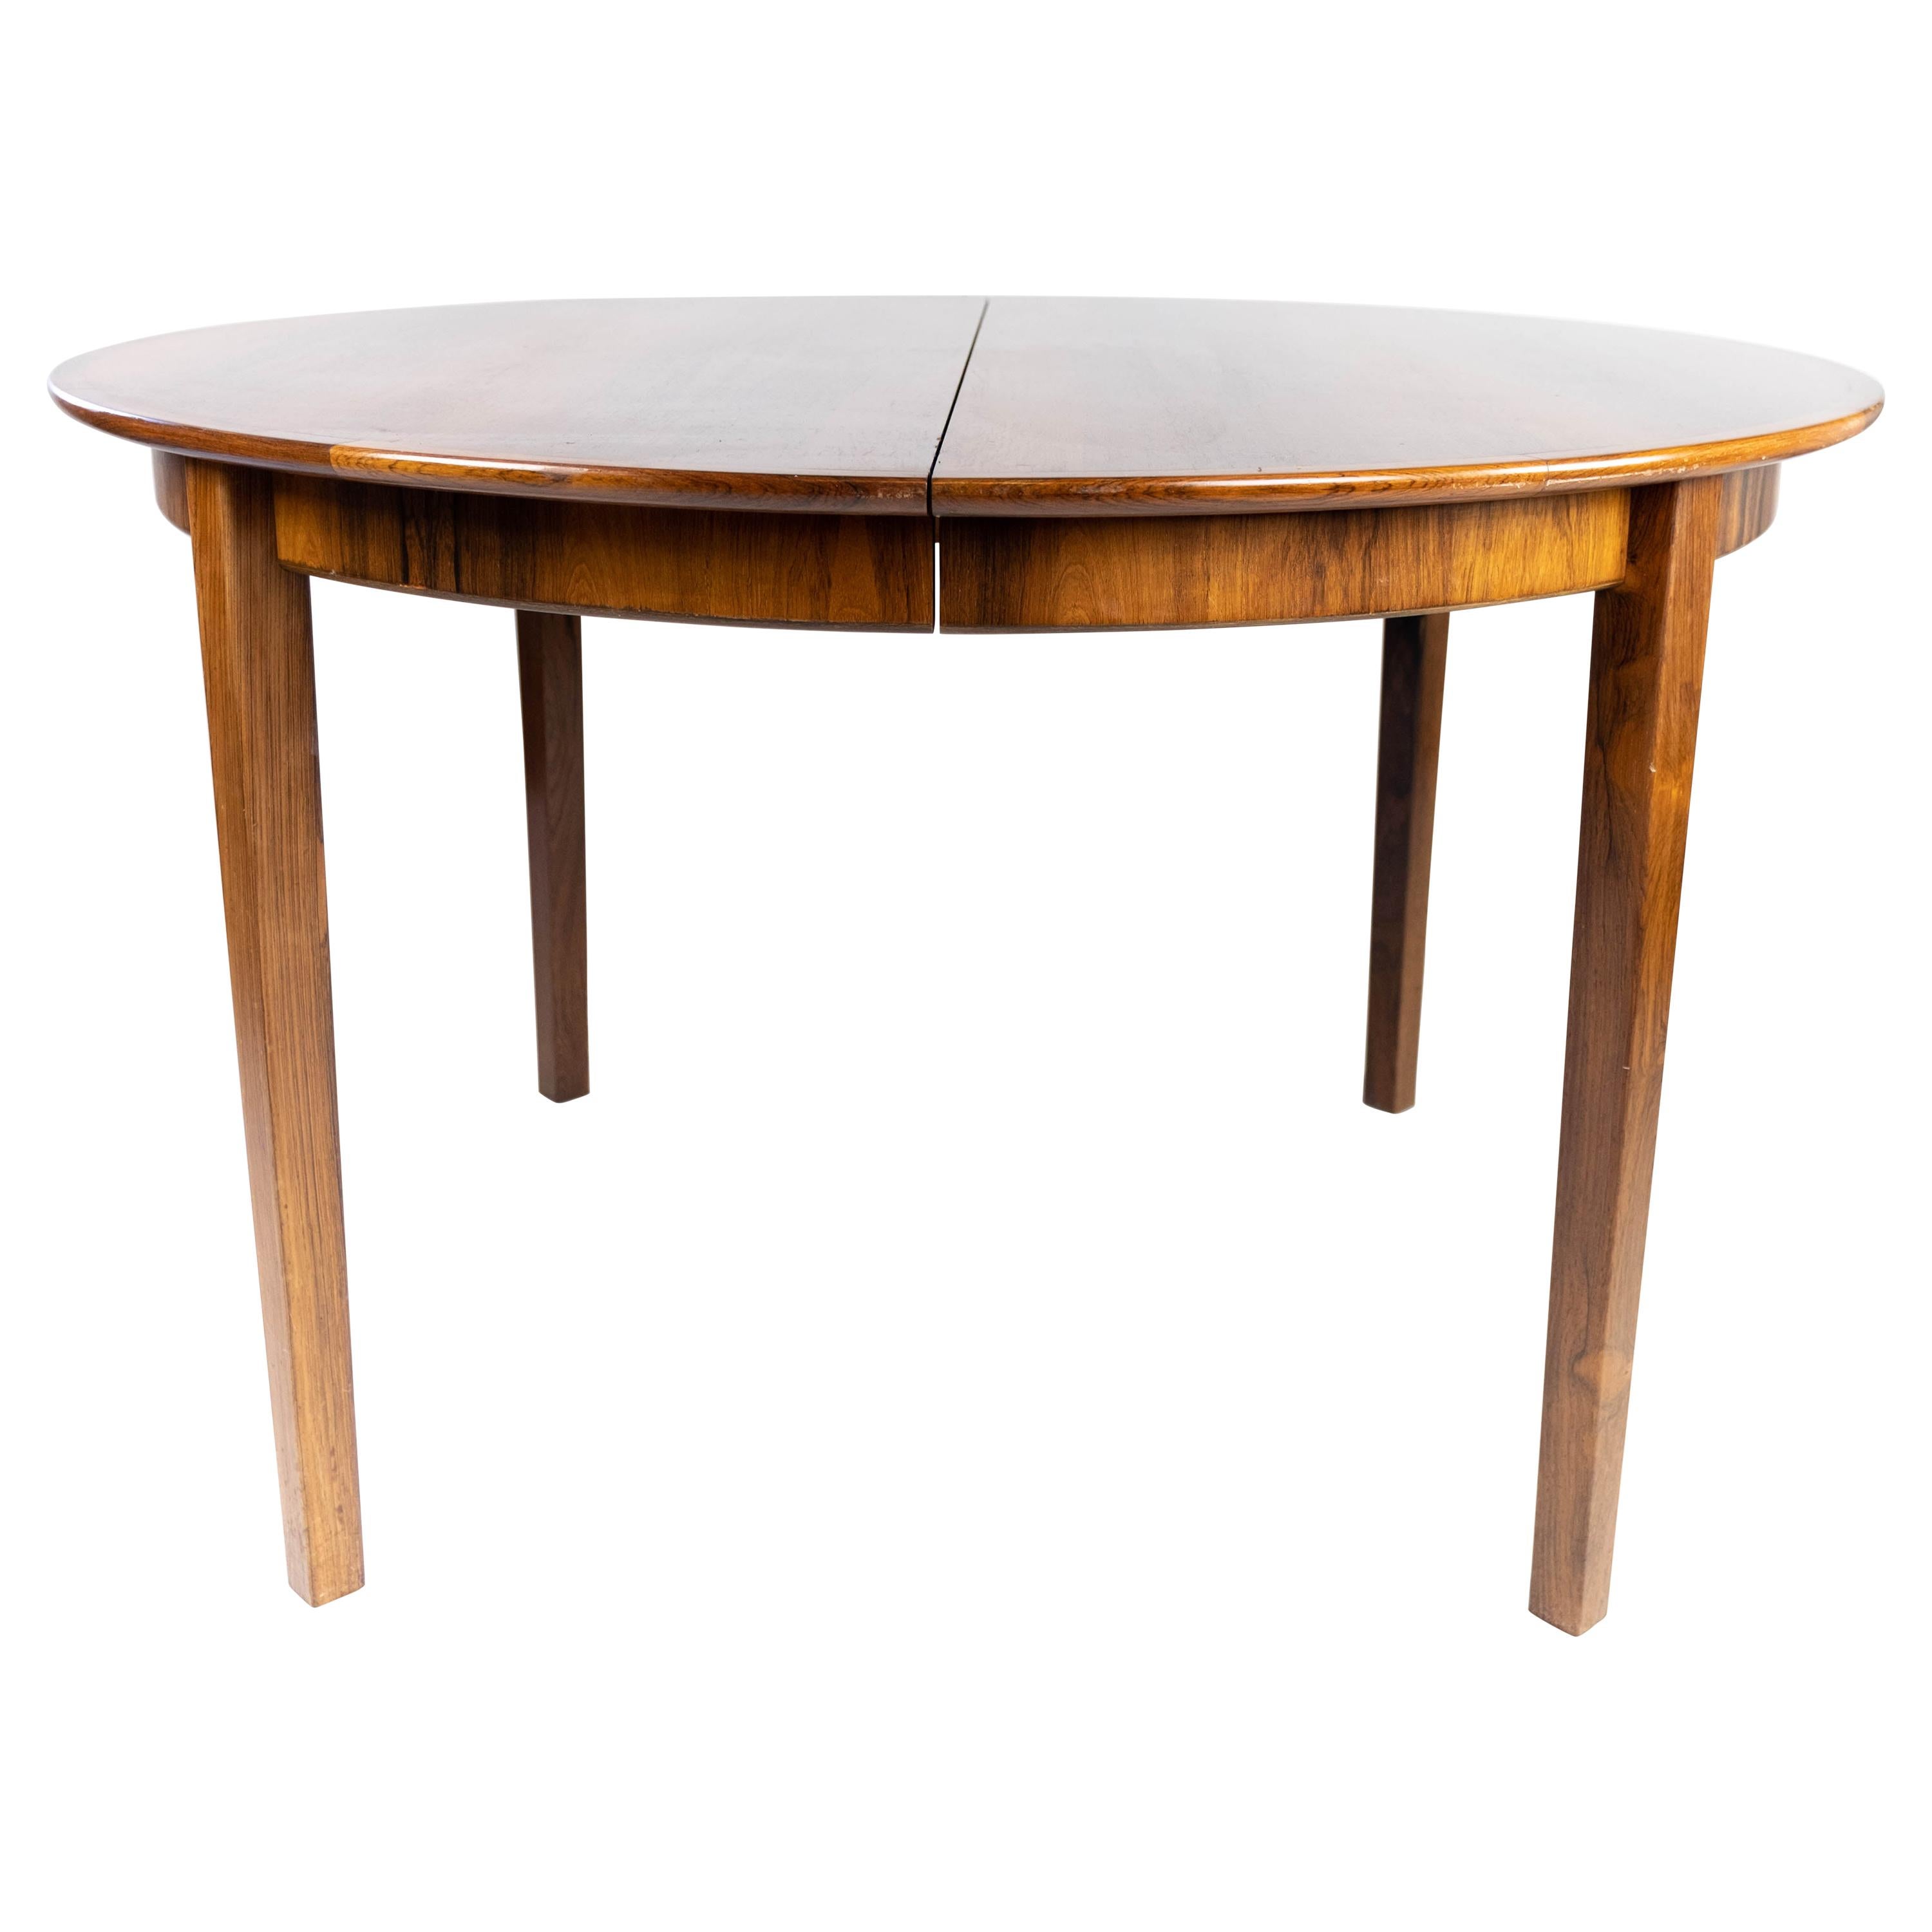 Dining Table Made In Rosewood With Extension Plates, Danish Design From 1960s For Sale